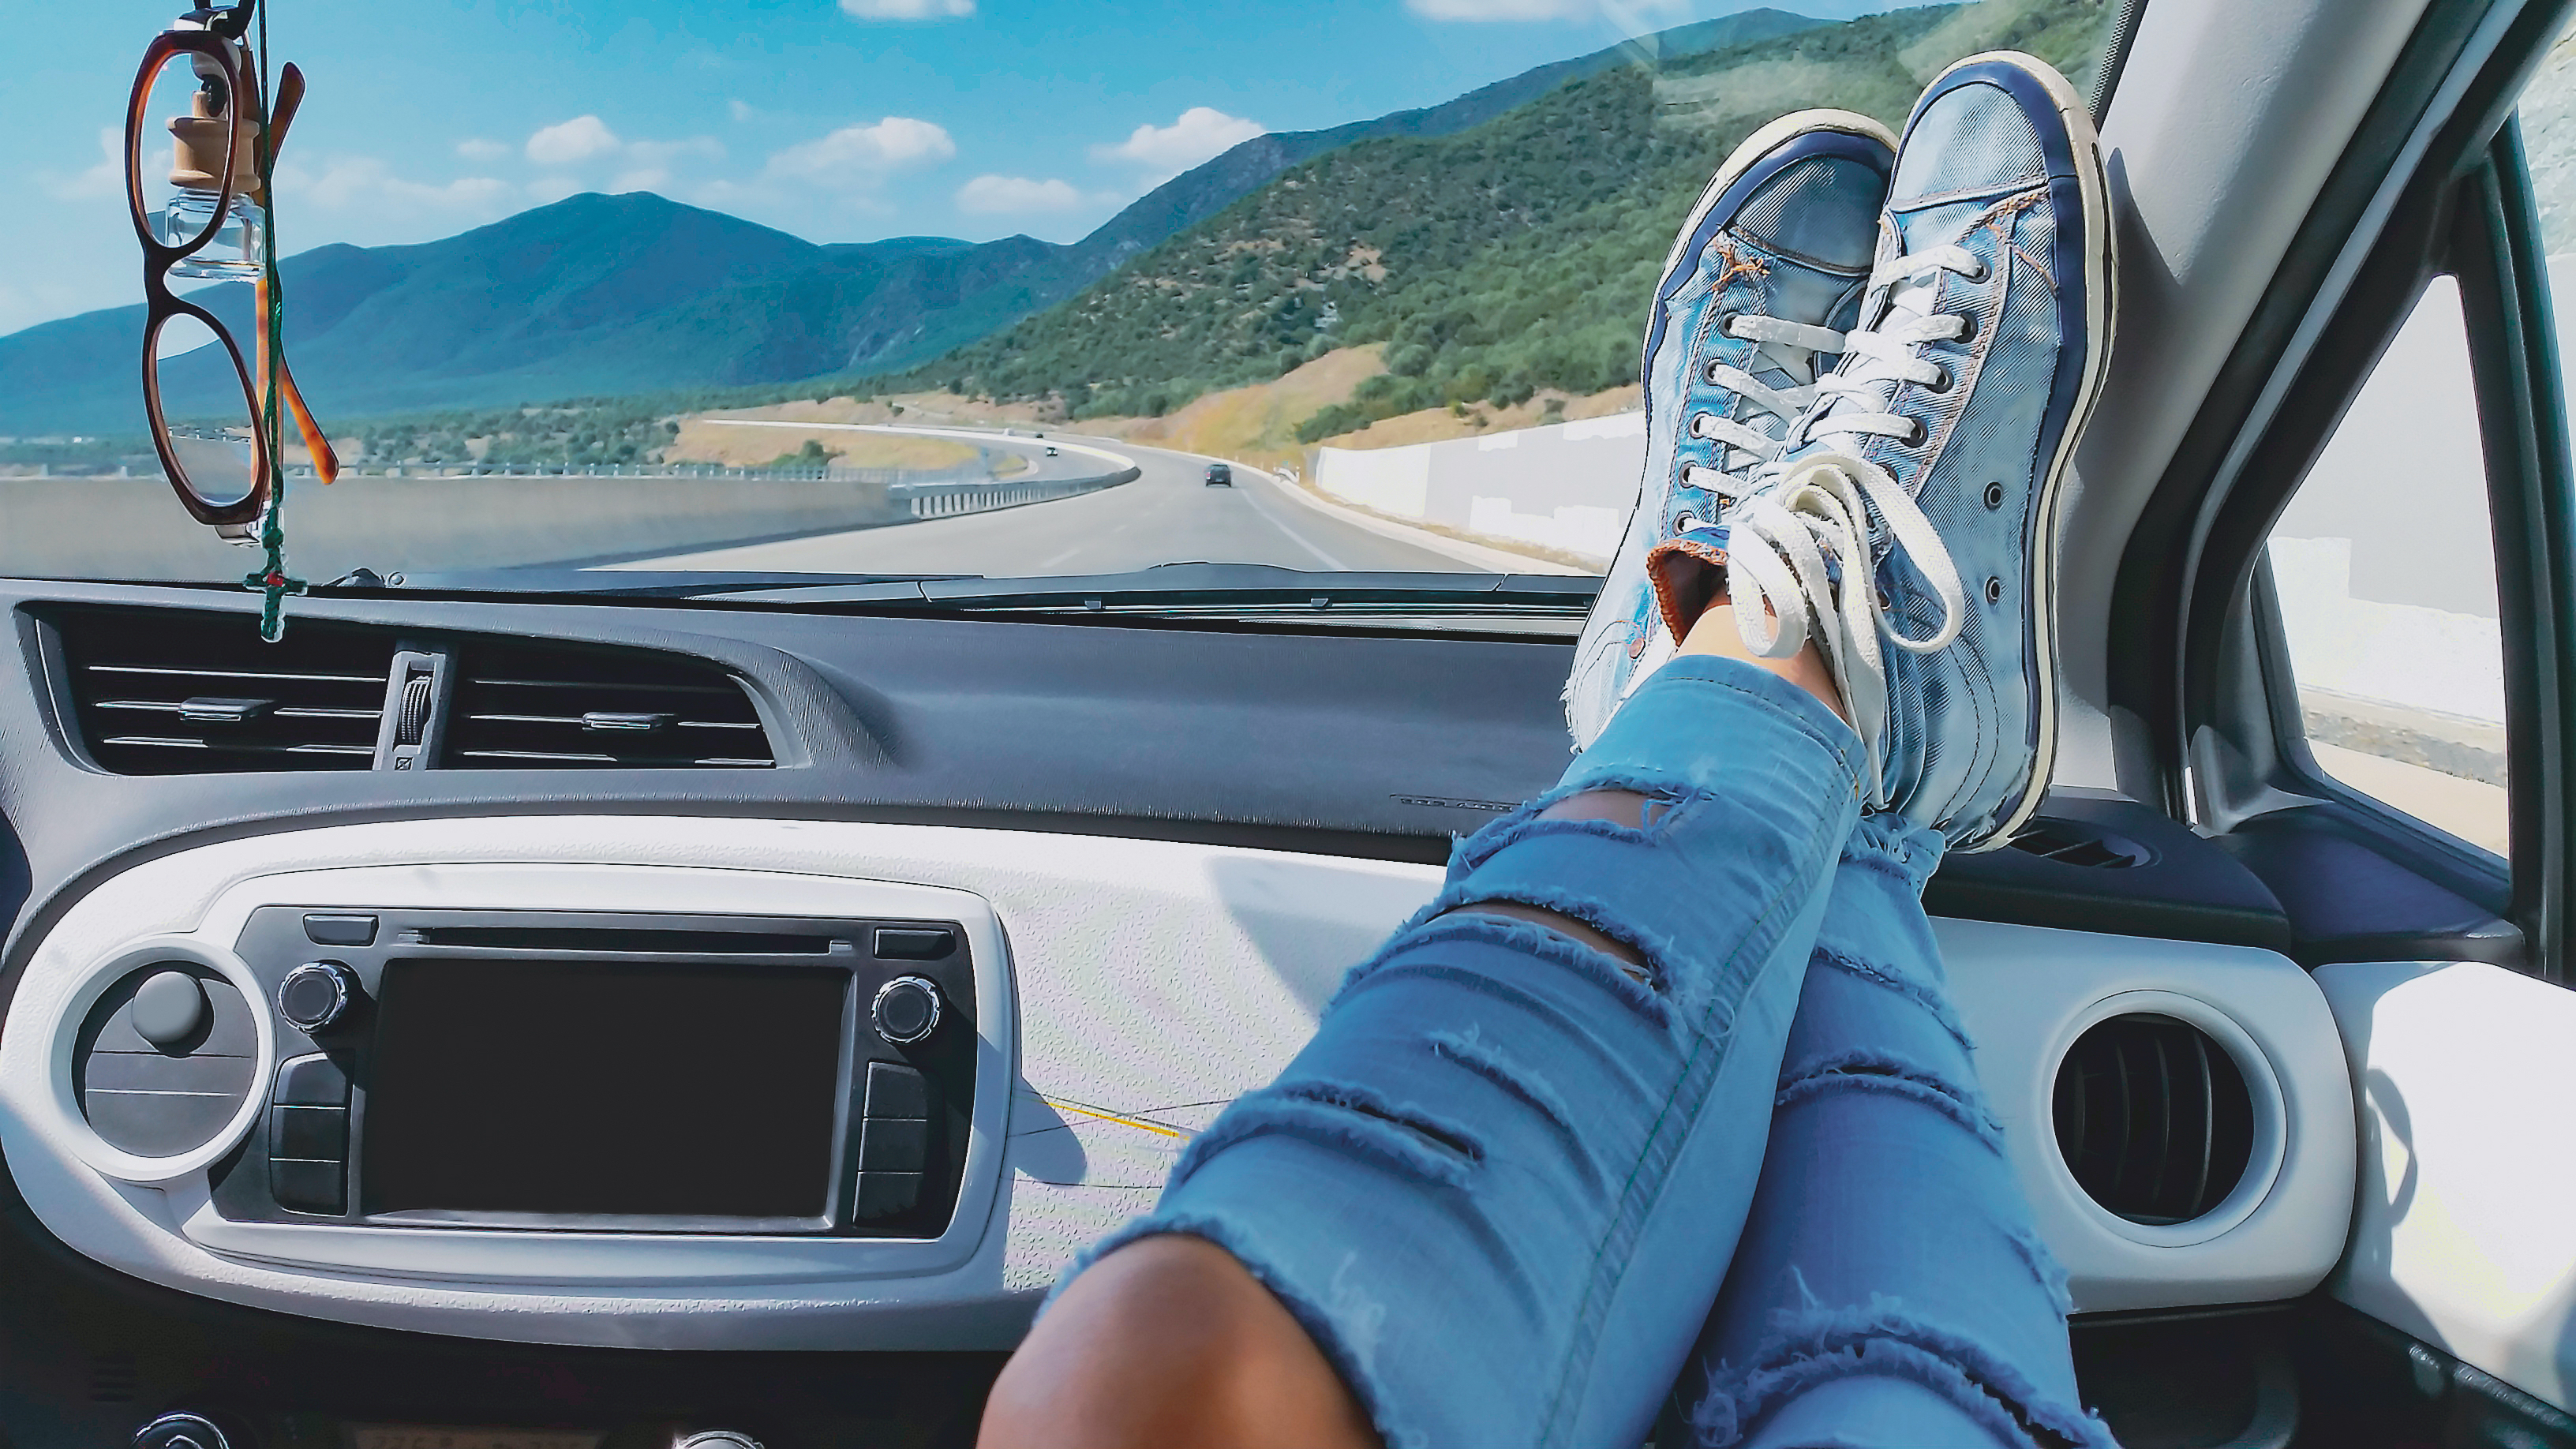 Female legs in ripped jeans and blue sneakers inside car with mountains landscape at background. Woman relaxing during road trip